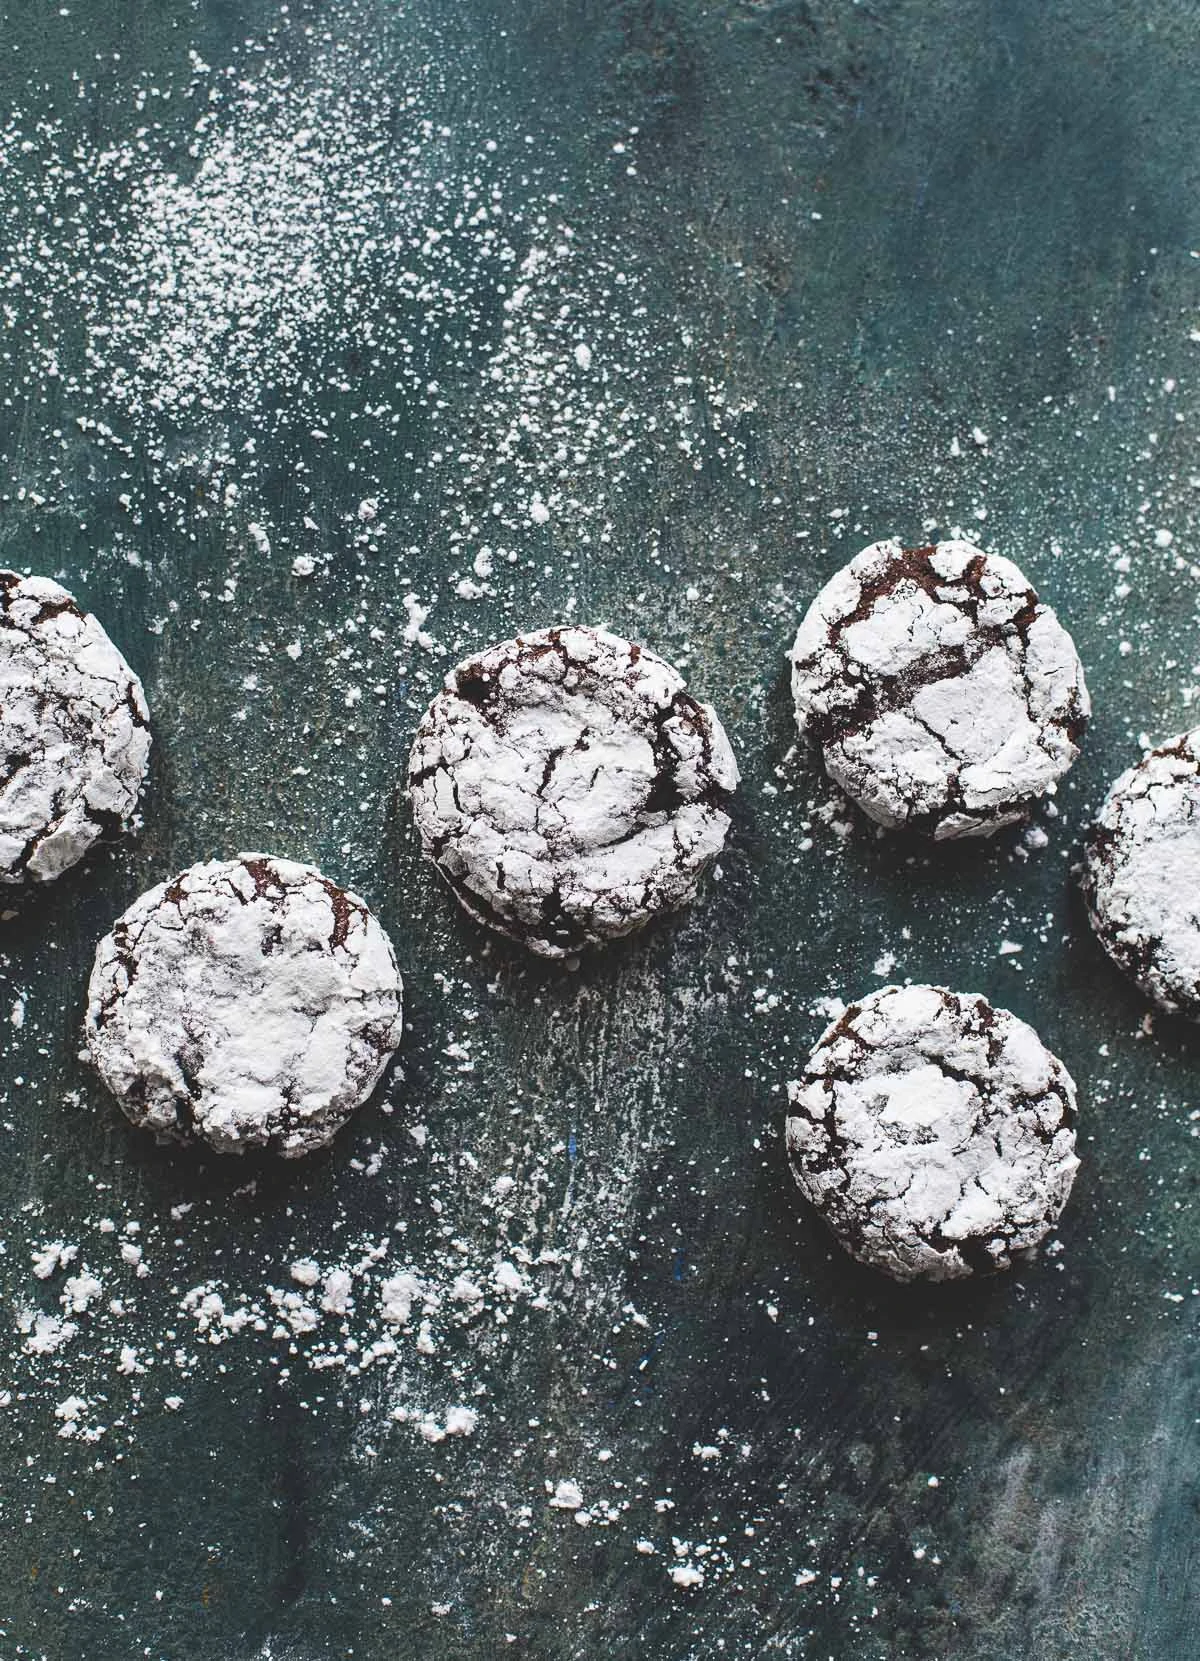 Fudgy Peppermint Chocolate Crinkle Cookies {made with teff flour, gluten-free, gum-free}